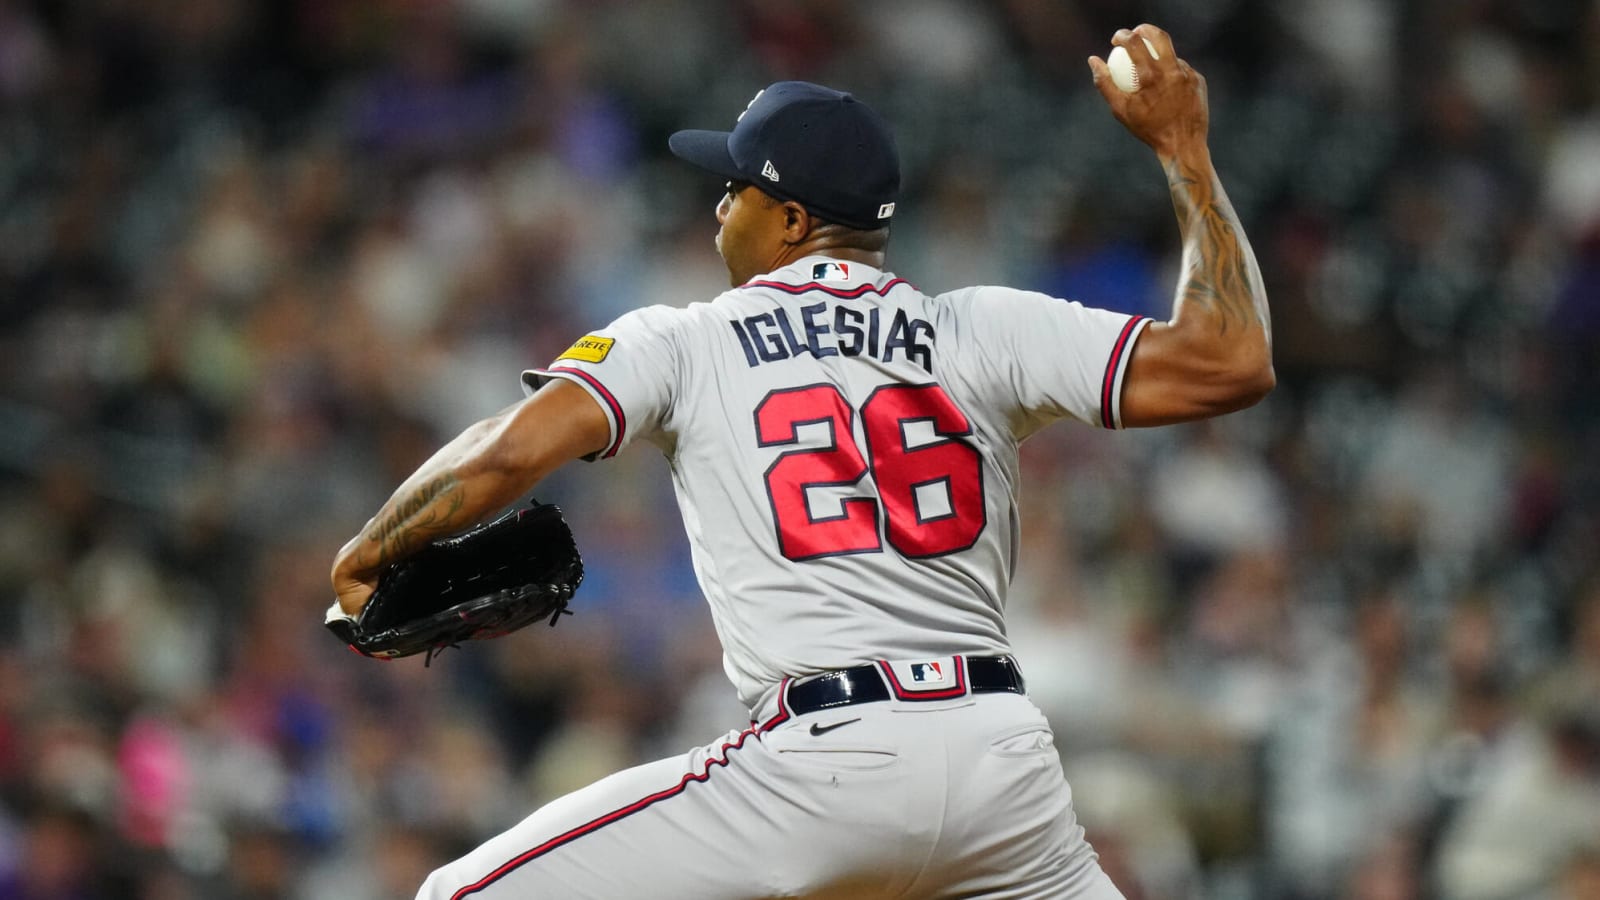 Braves closer Raisel Iglesias has been dominant since his arrival